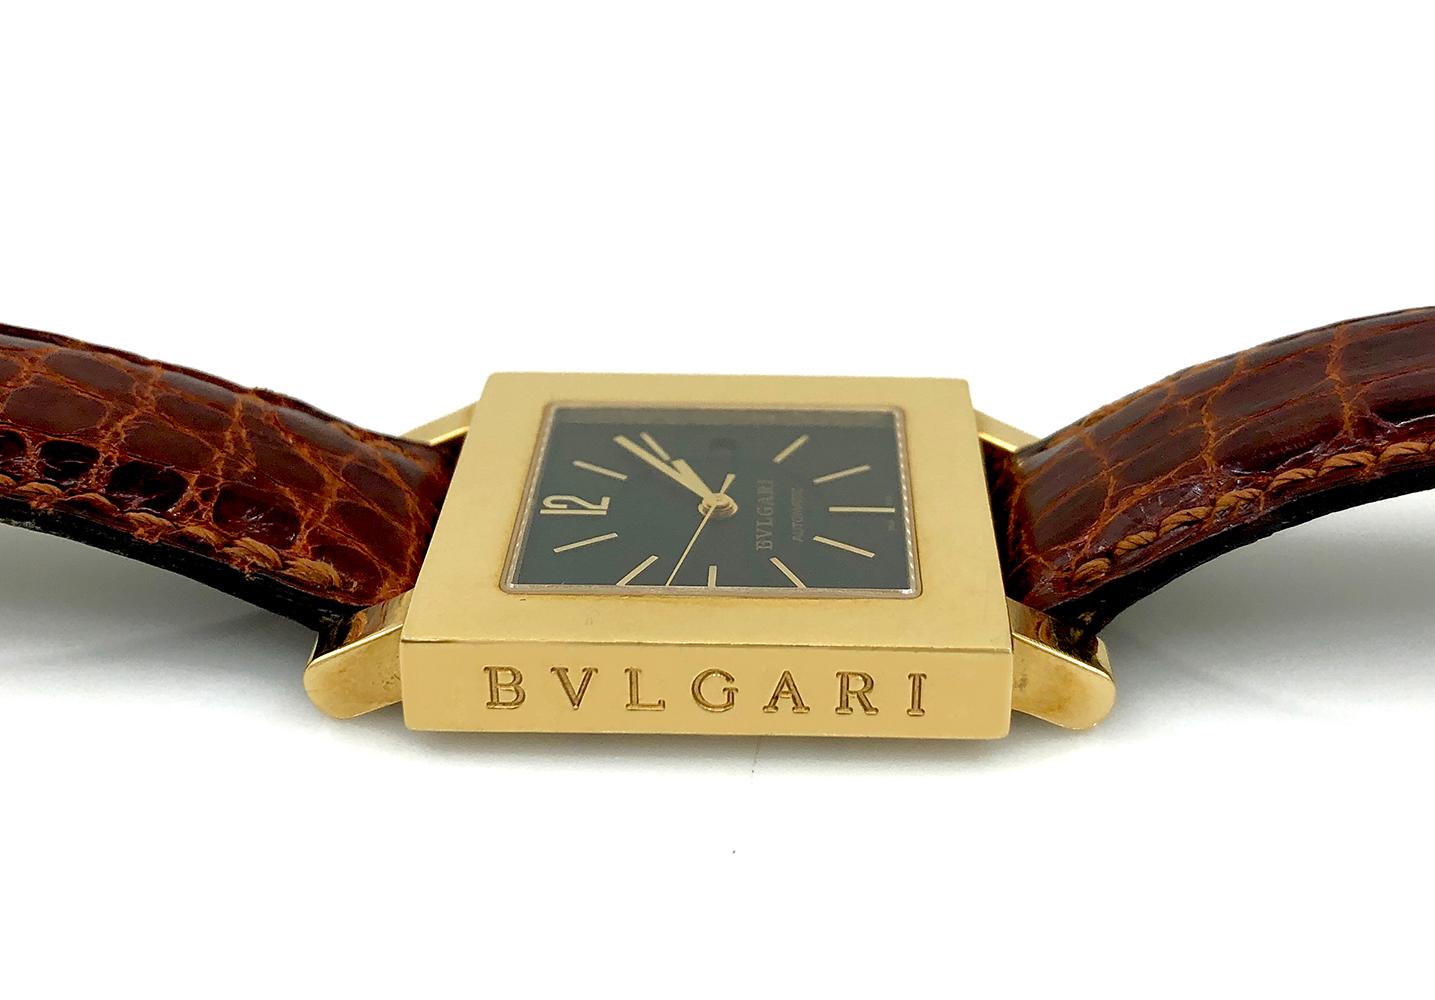 A vintage Bulgari wrist watch that emits timeless elegance and sophistication, comprised of an 18k gold square-shaped dial featuring a black face with gold hands and markers, finished with a brown leather strap. Approx. 28mm